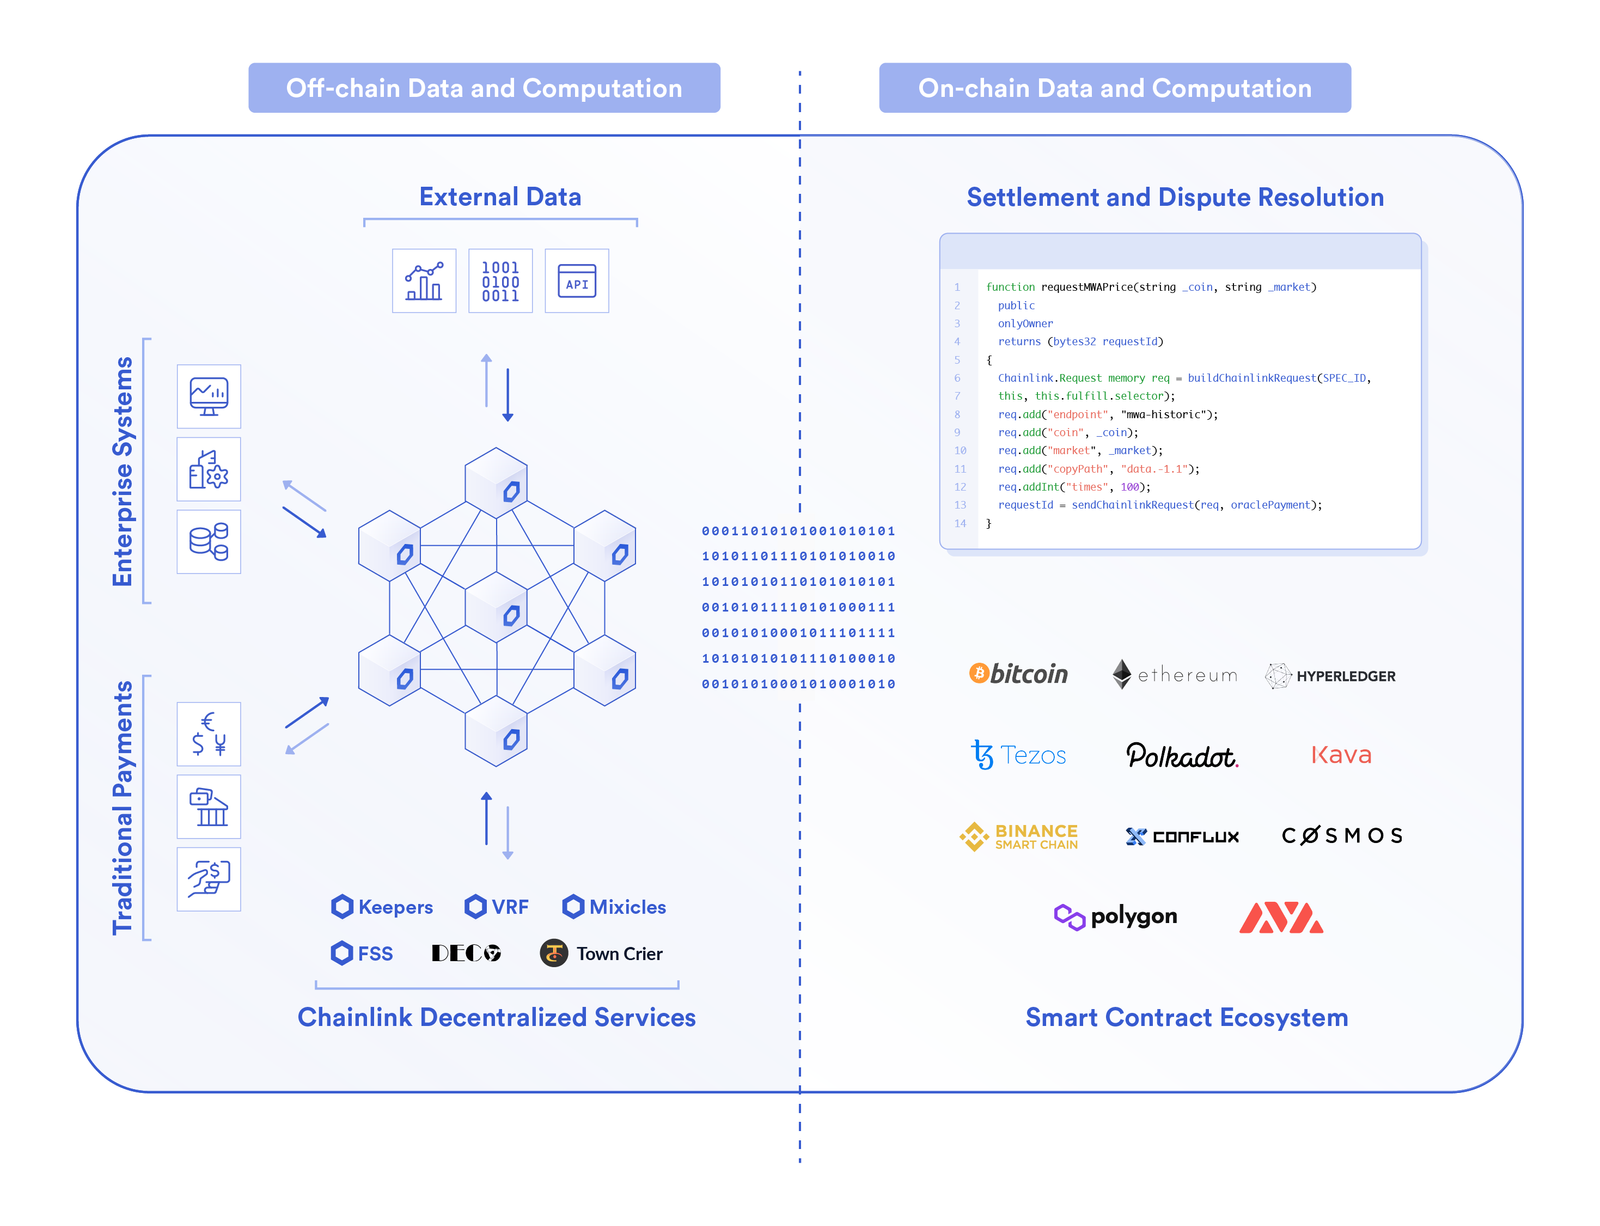 Shows what are Hybrid Smart Contracts in Chainlink.